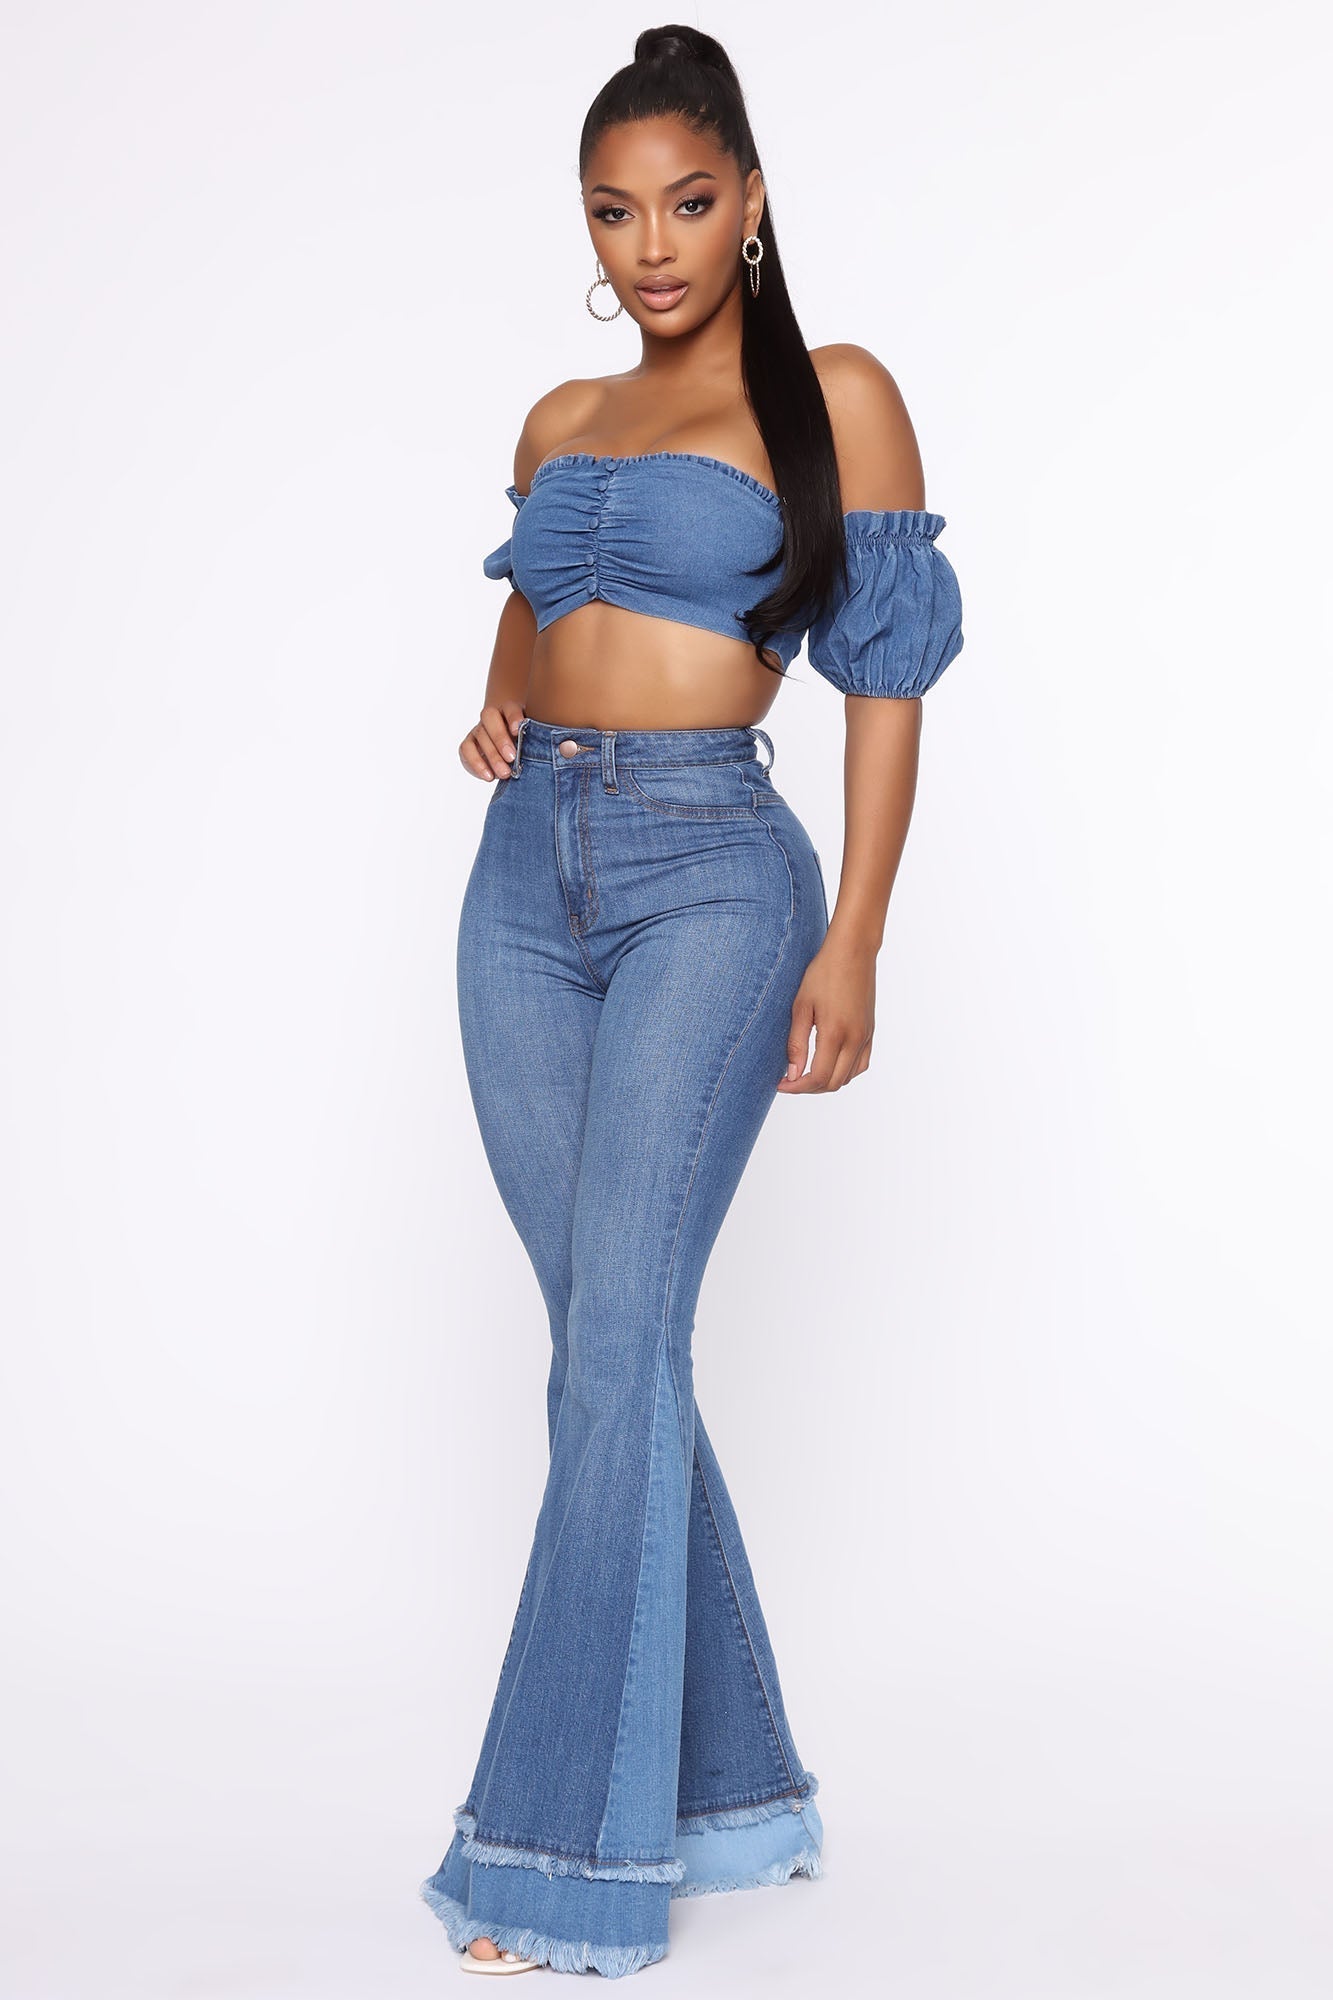 Only The Best Vibes Bell Bottom Jeans - Medium Blue Wash Sai Feel